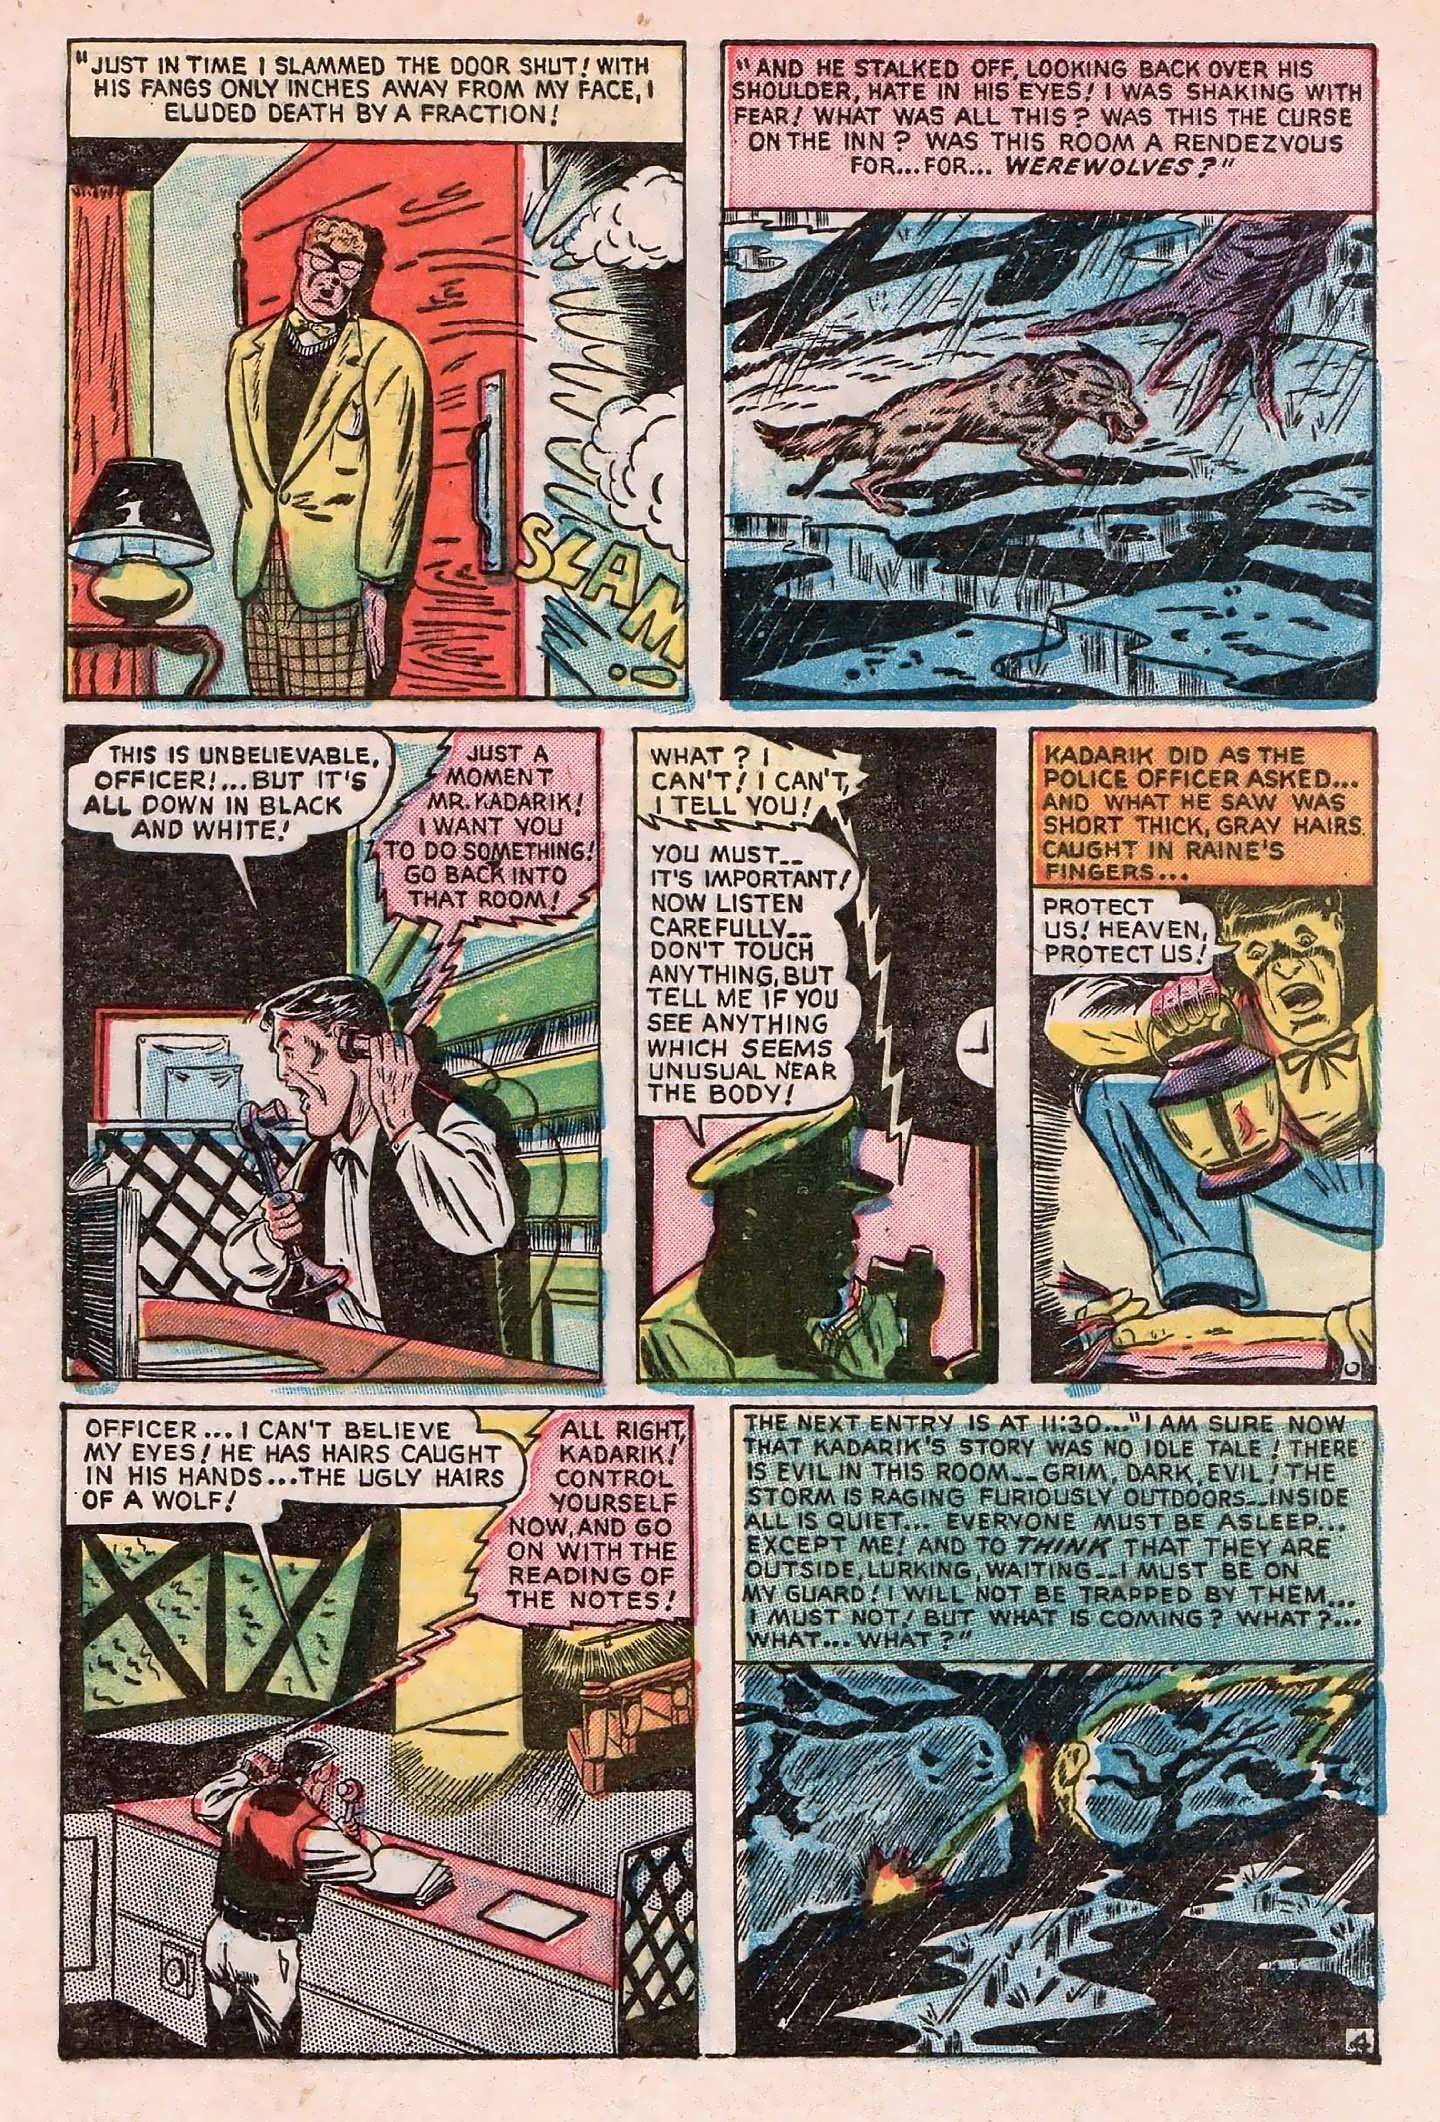 Marvel Tales (1949) 93 Page 5